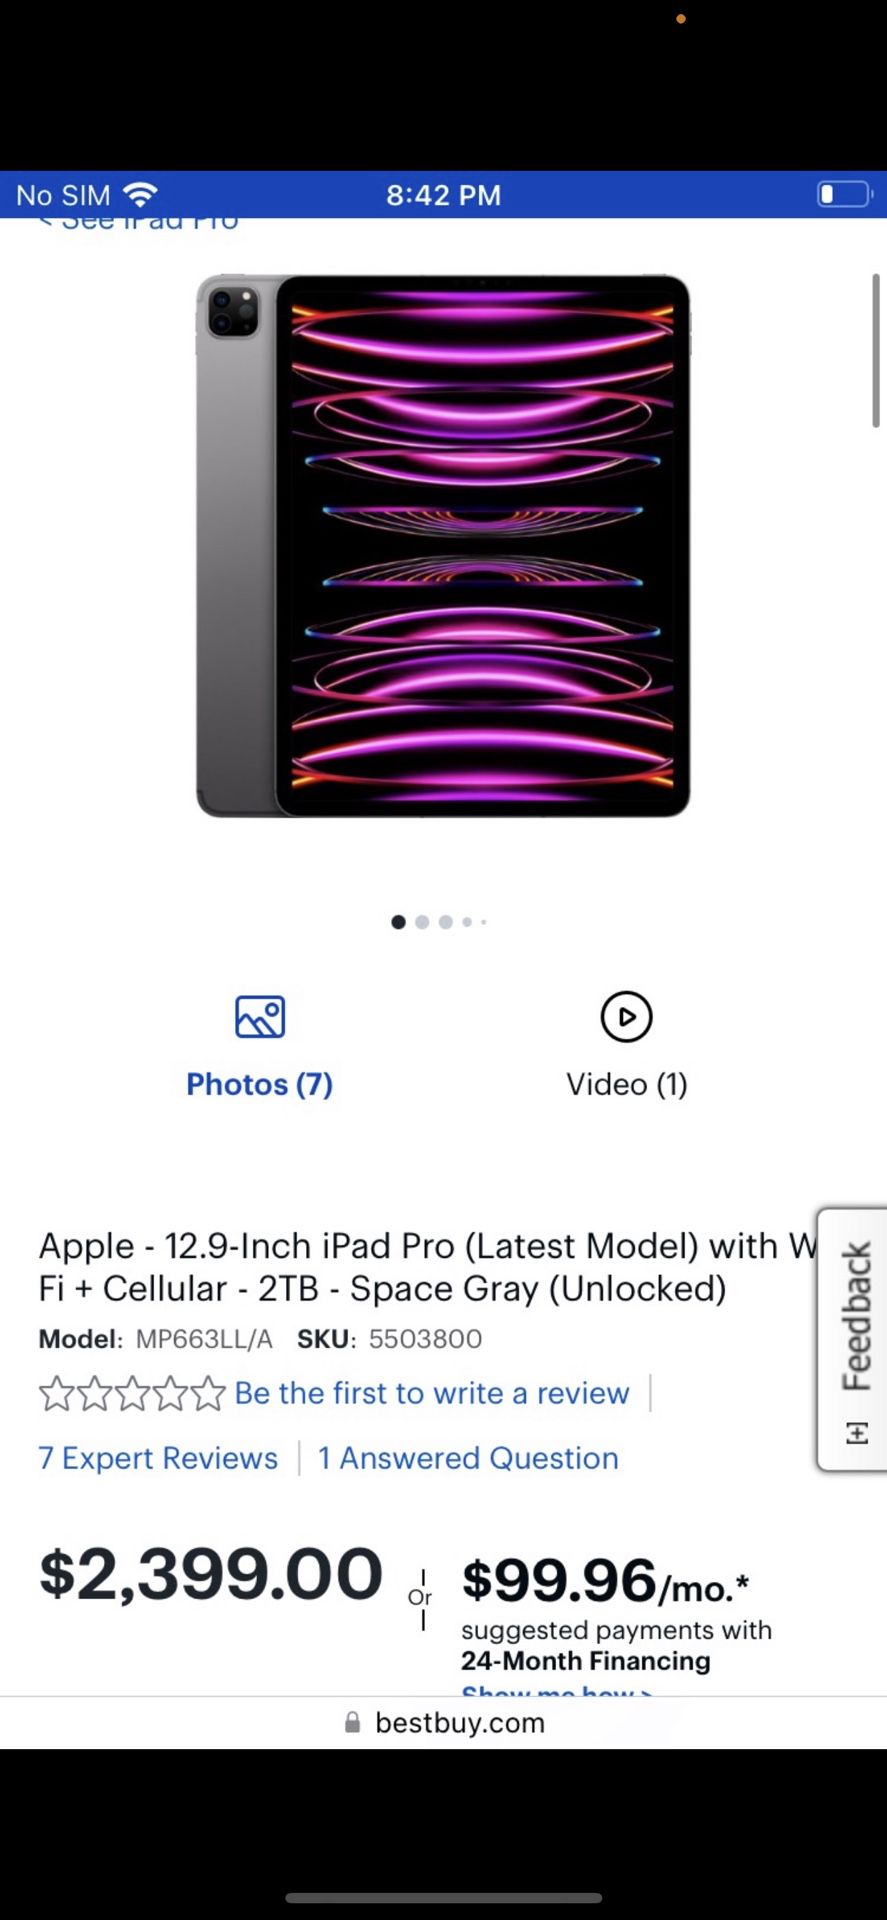 Apple - 12.9-Inch iPad Pro (Latest Model) with Wi-Fi + Cellular - 2TB - Space Gray (Unlocked)